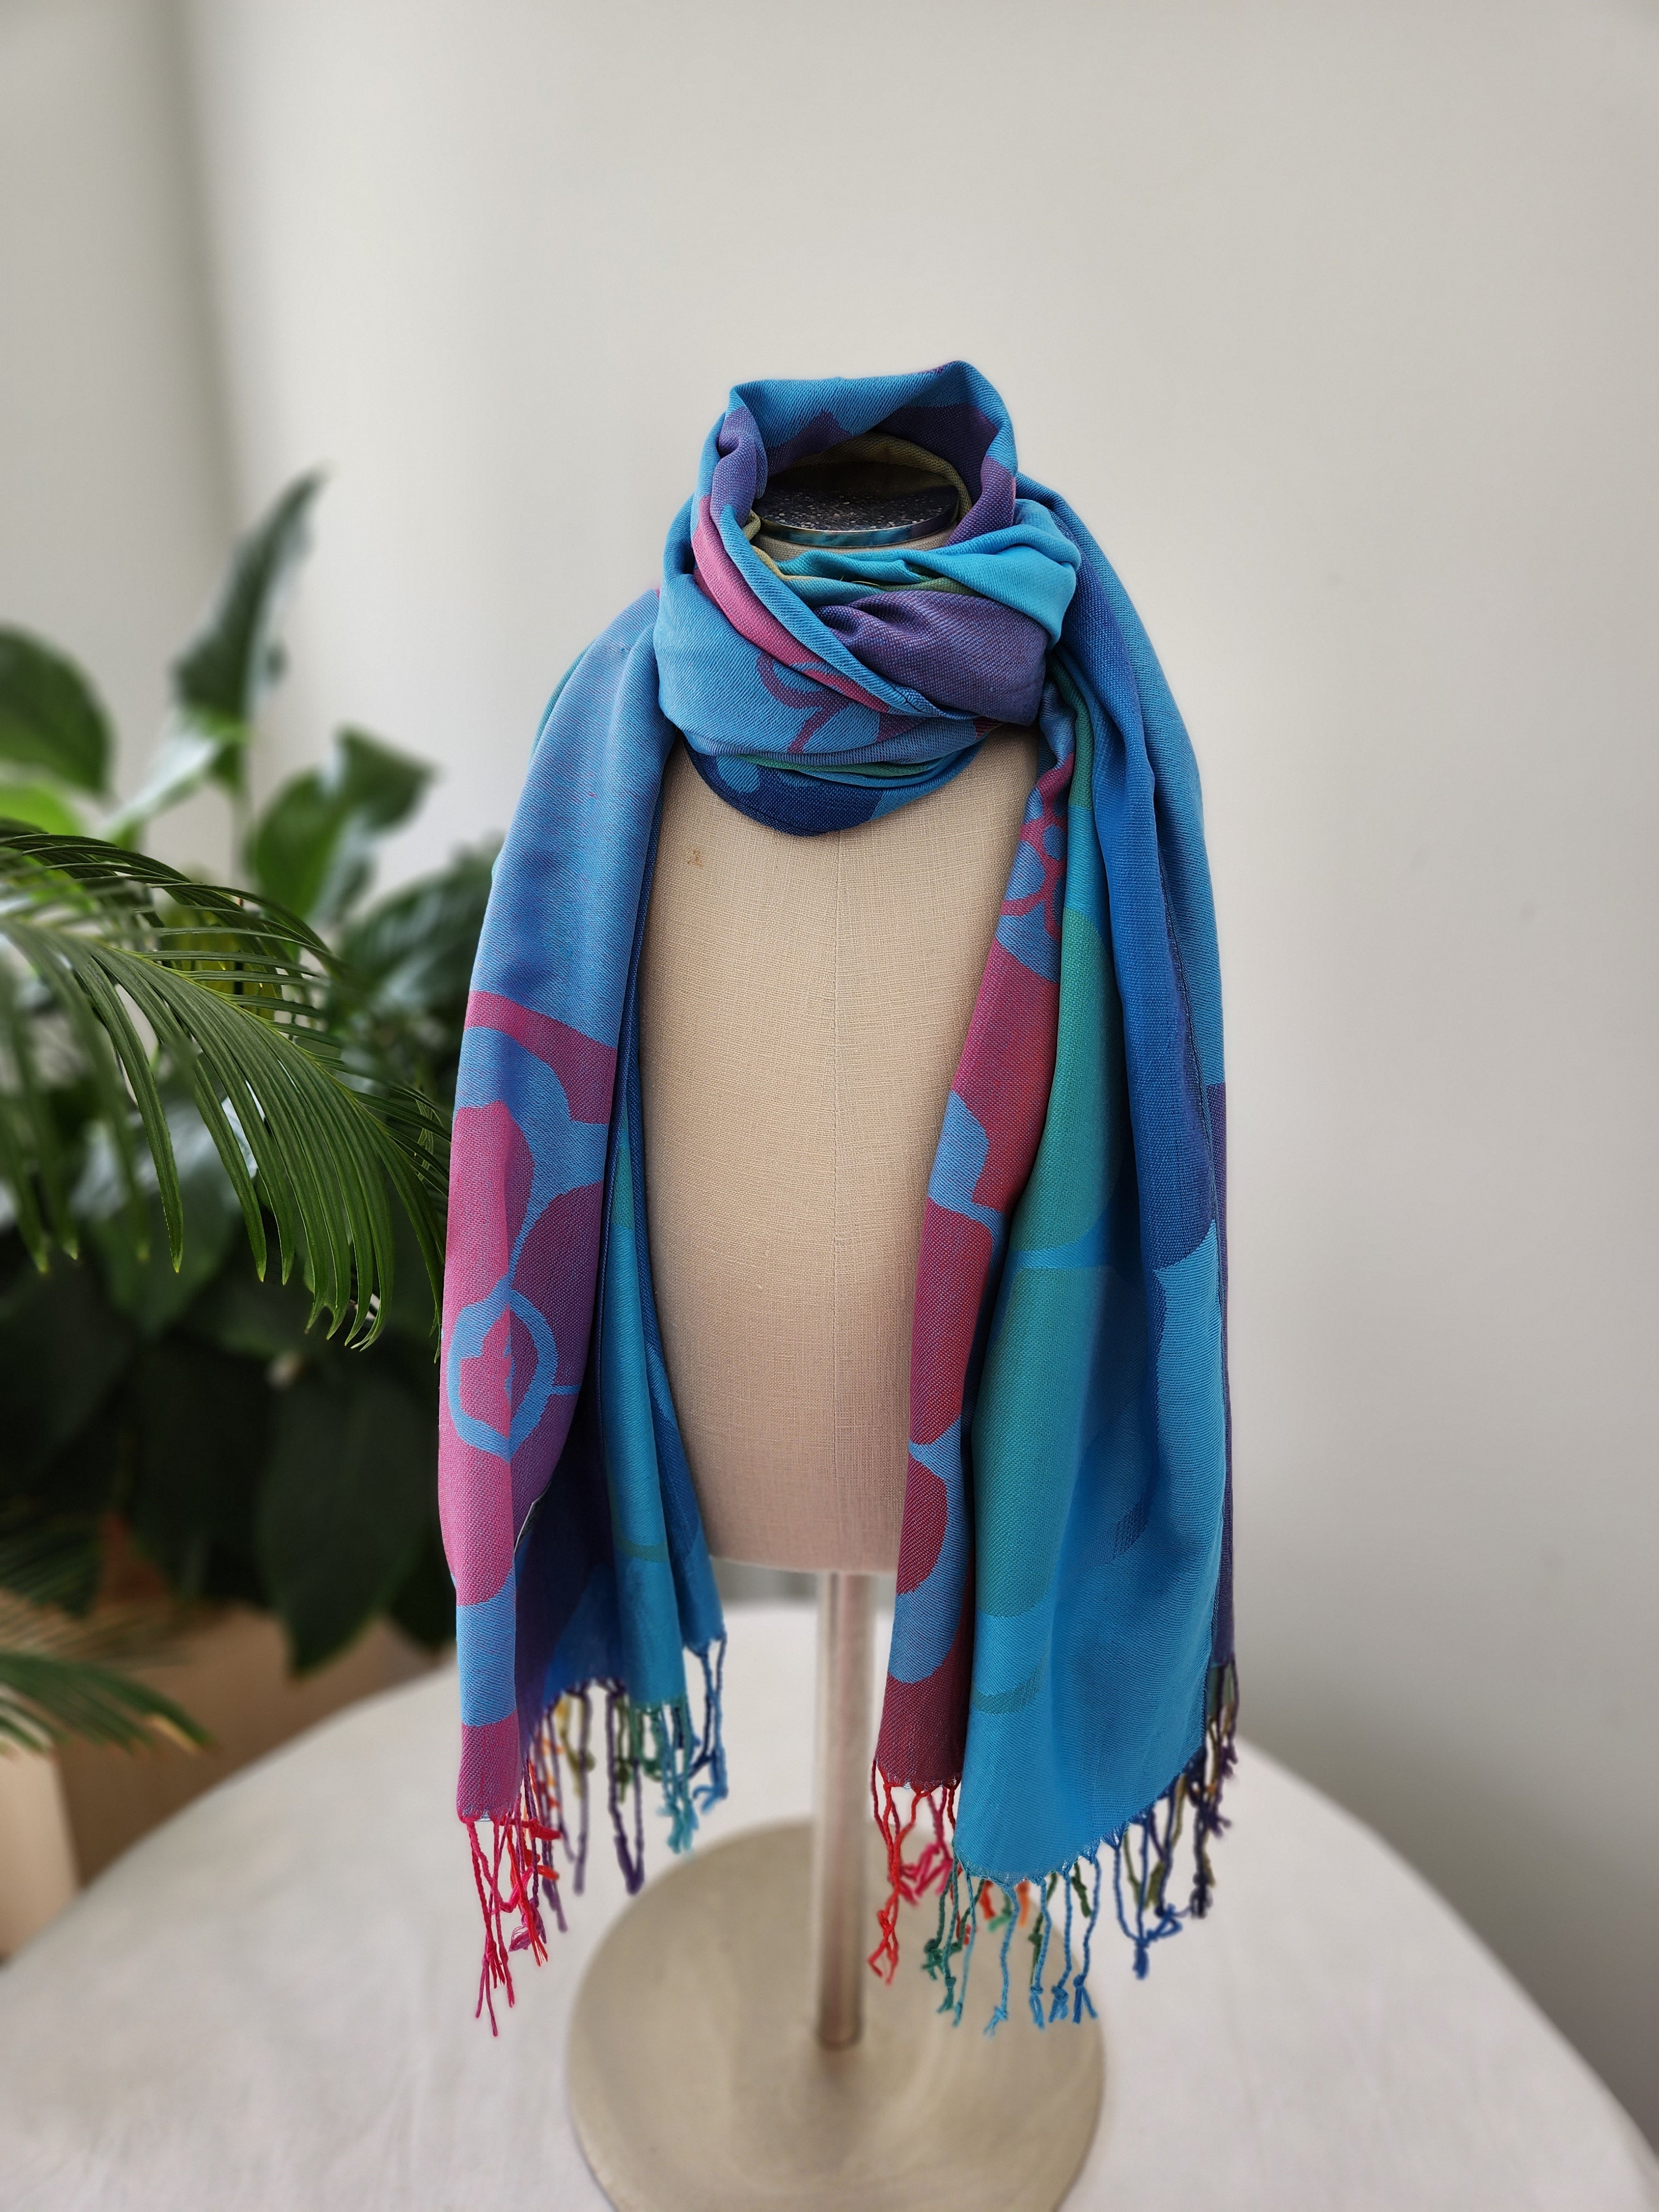 Buy ocean Colorful Women&#39;s Scarf in Vibrant, Tropical Colors Makes A Great Holiday Gift